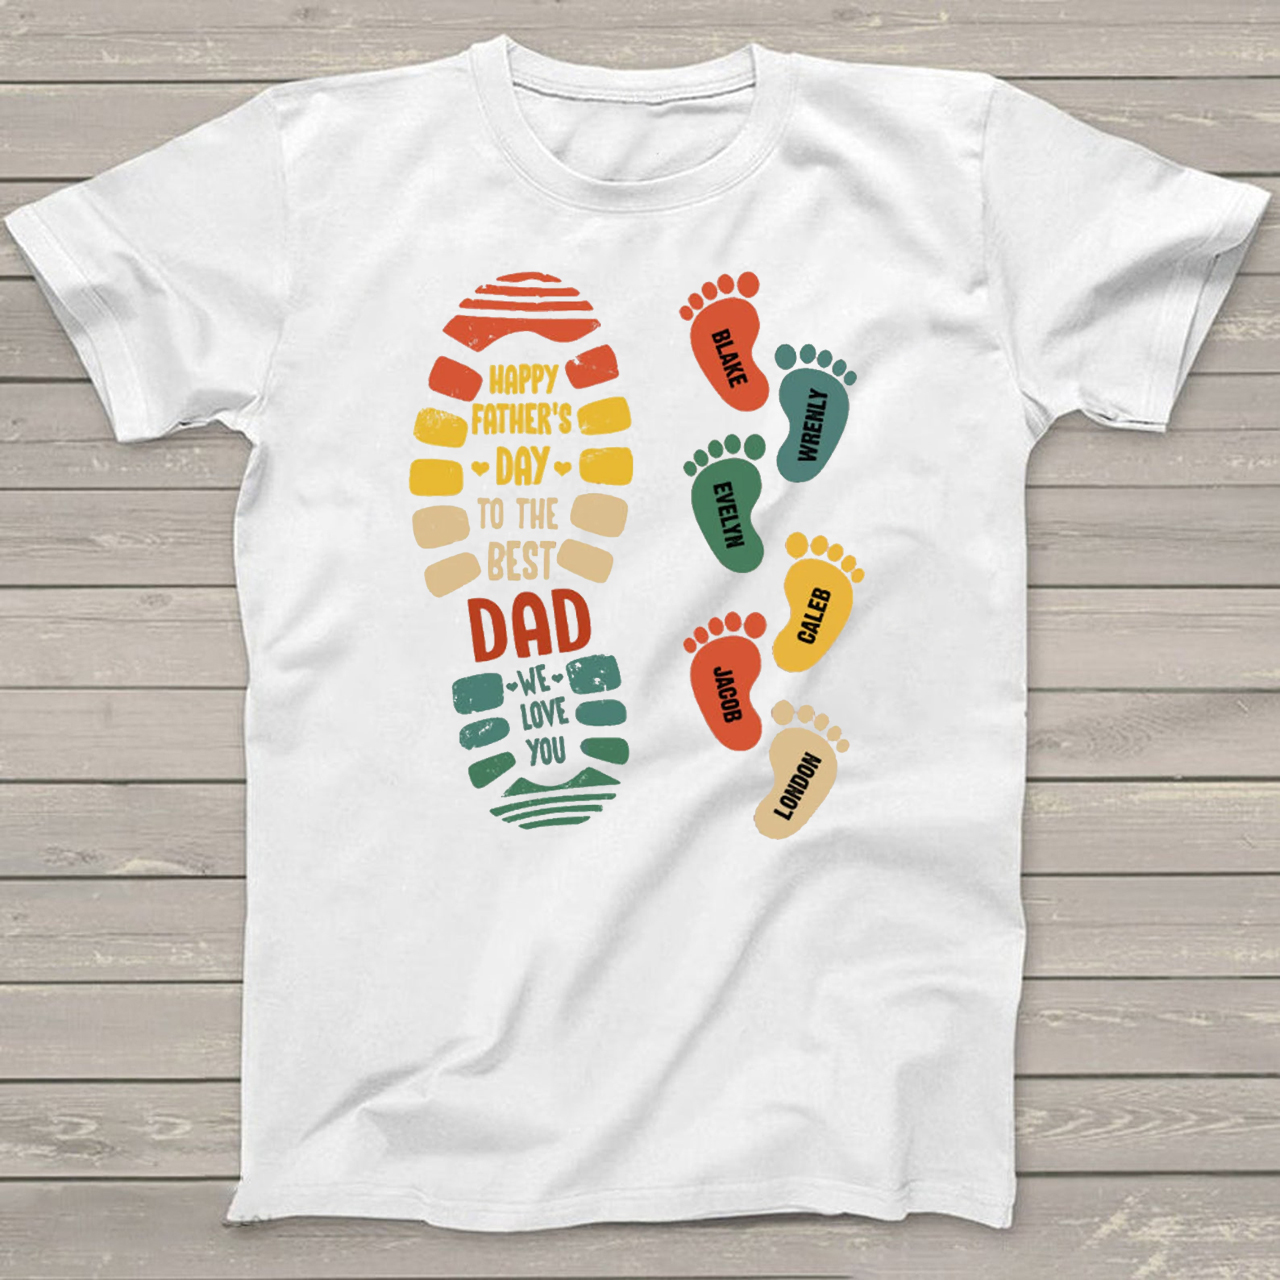 Footprints Dad Shirt Personalized With Name